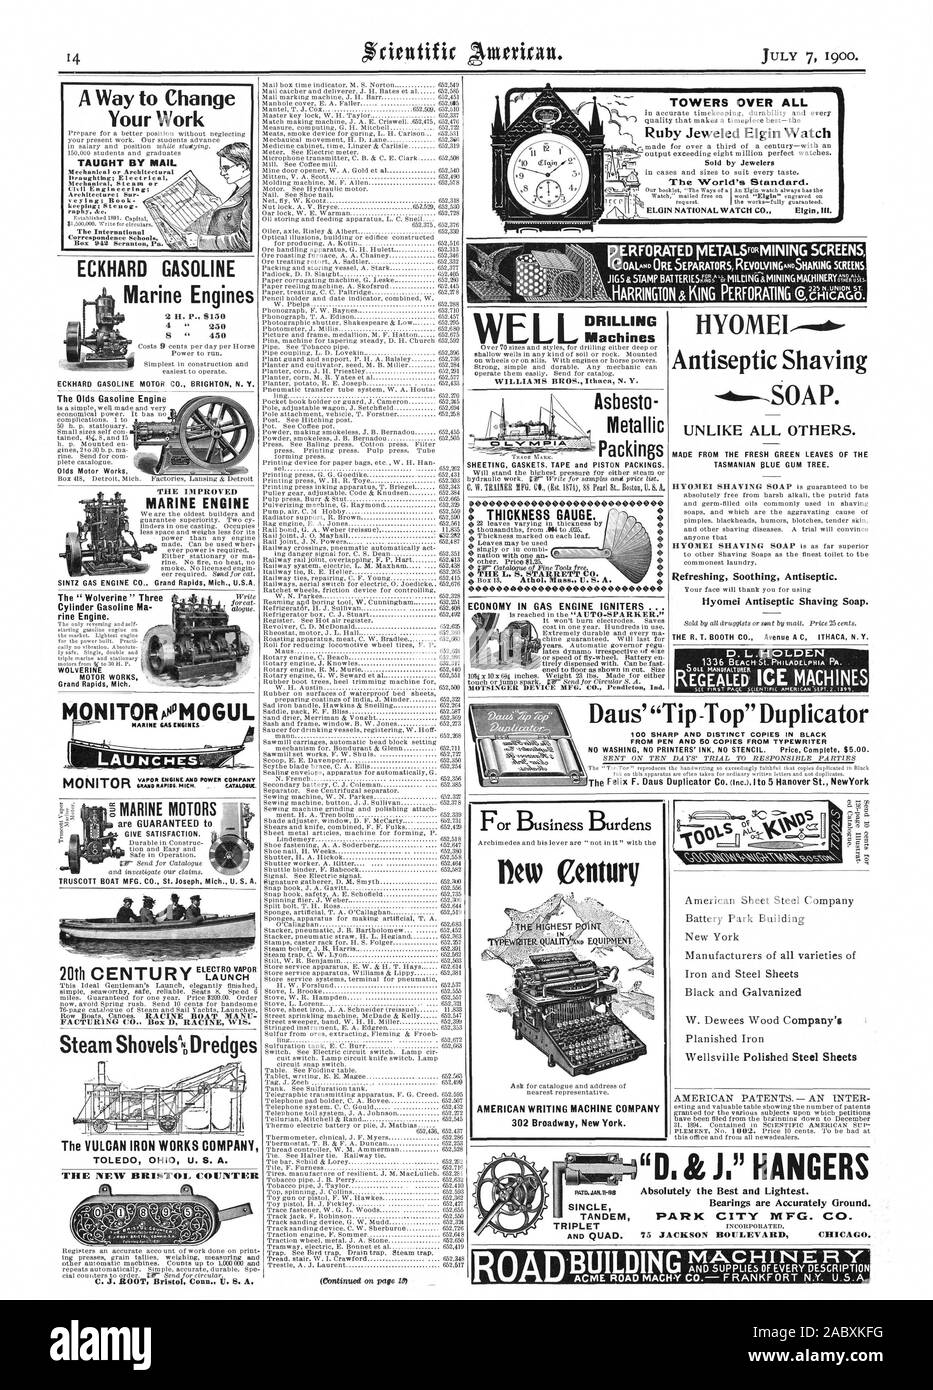 Your Work TAUGHT BY MAIL Marine Engines 2 H. P. 8150 S ' 450 ECKHARD GASOLINE MOTOR CO. BRIGHTON N. Y. Olds Motor Works MARINE ENGINE SINTZ GAS ENGINE CO Grand Rapids Mich. U.S.A. WOLVERINE MOTOR WORKS Grand Rapids Mich. LAUNCH ONITORIMOGUL GIVE SATISFACTION. TRUSCOTT BOAT MFG. CO. St. Joseph Mich. U. S. A. Steam Shovels%Dredges The VULCAN IRON WORKS COMPANY TOLED OHI U. S. A. DRILLING Machines illiplIMIZMEZZff 1- -= --:'.' -s --  - MetalliC Paclungs SHEETING GASKETS. TAPE and PISTON PACKINGS. 09999999999999999999999999 99 00 0000000000000000000000000 9 9 THE NEW BRISTOL COUNTER HYOME1 Stock Photo